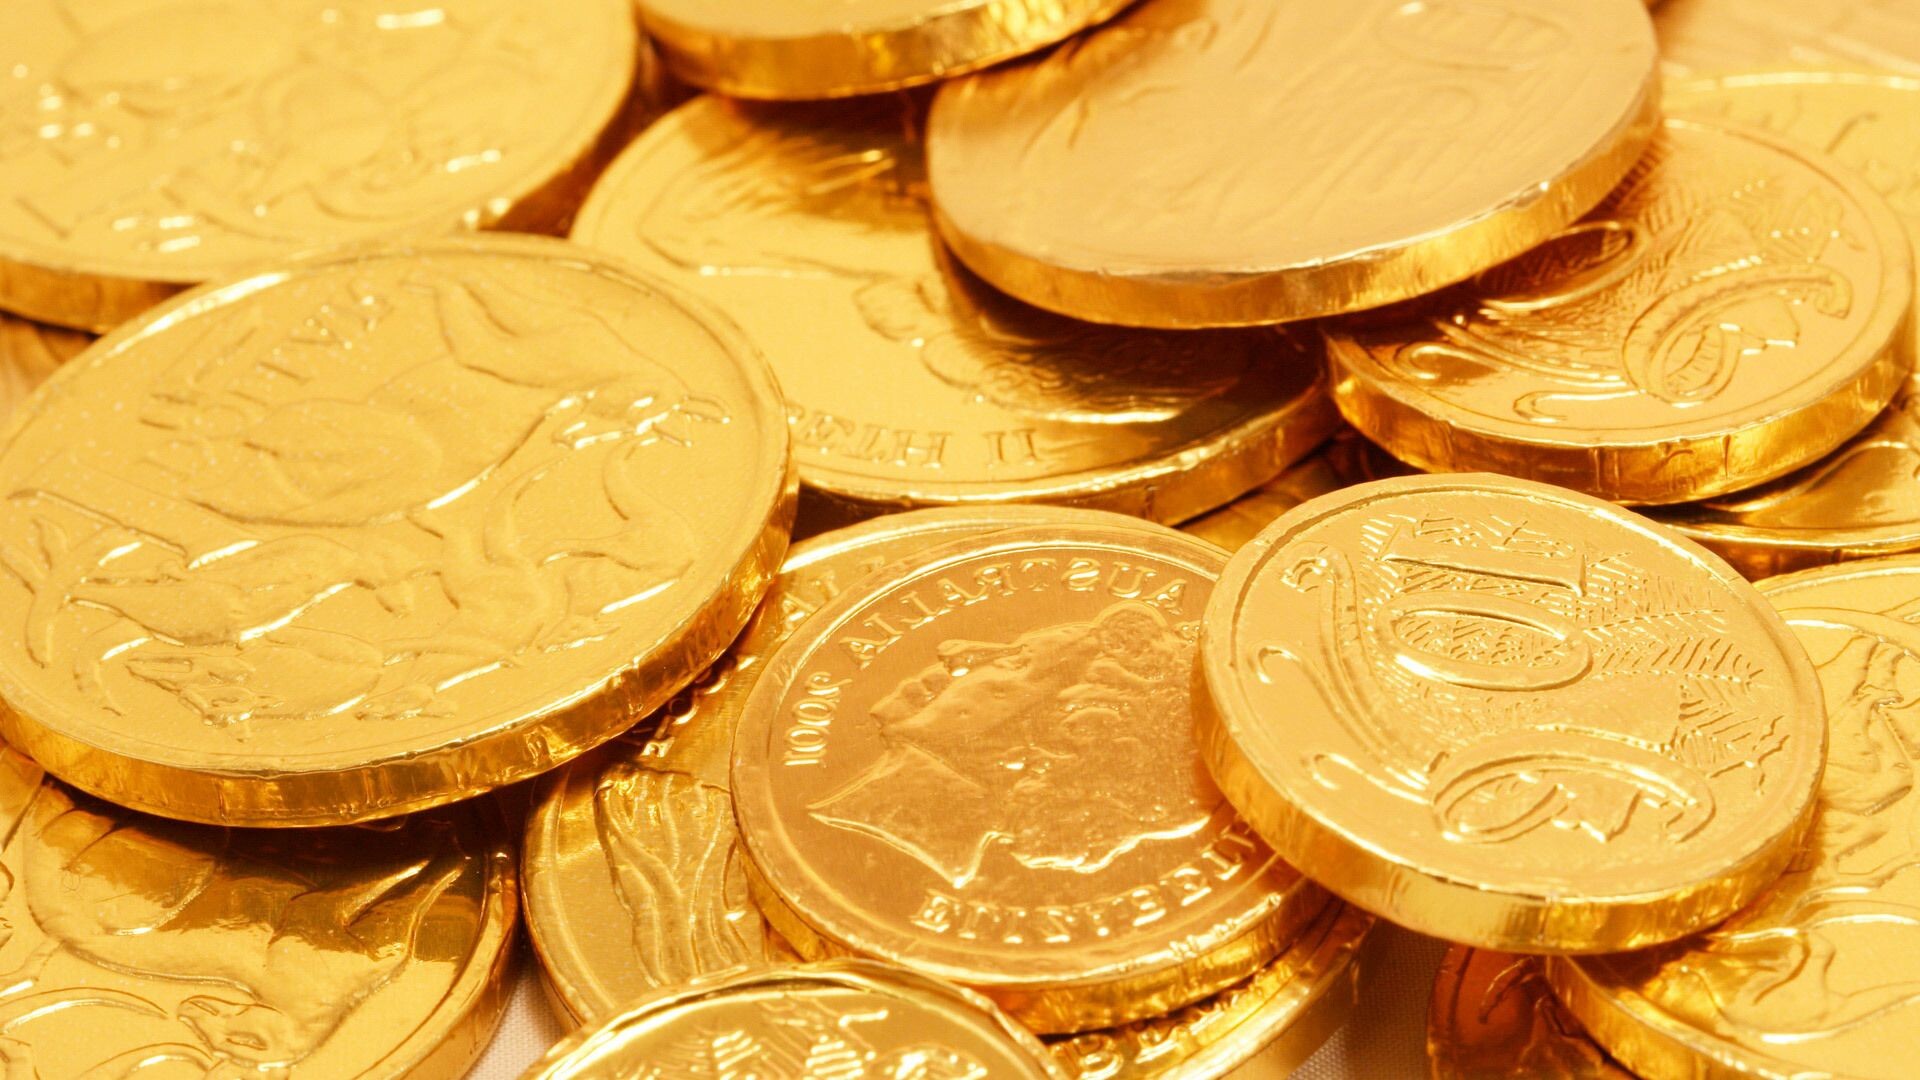 Gold Coins: Mint marks, High quality coin from precious metal, Money systems around the world. 1920x1080 Full HD Background.